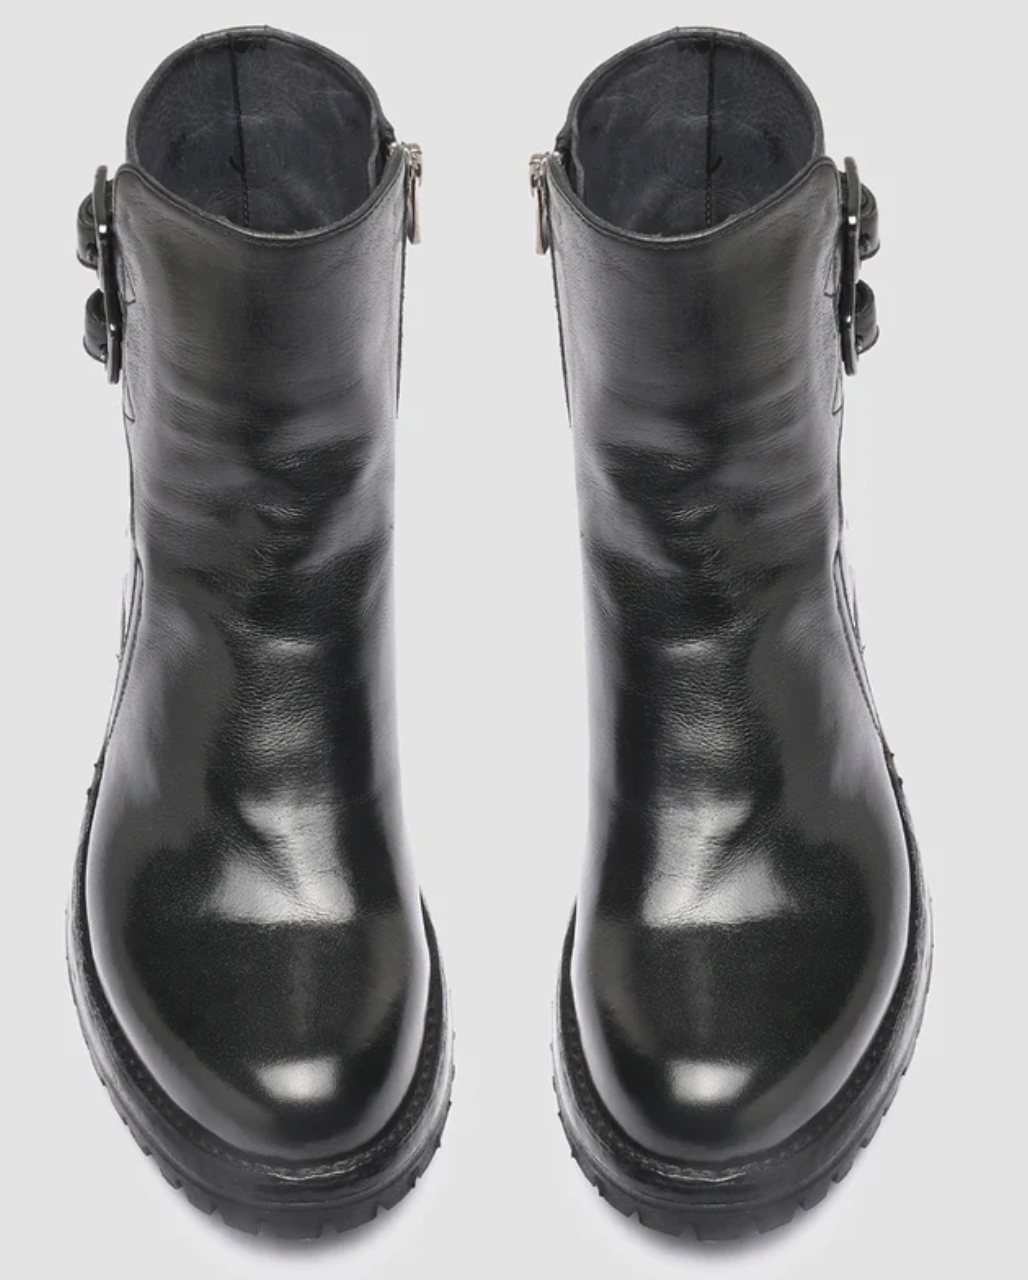 Loraine Boots